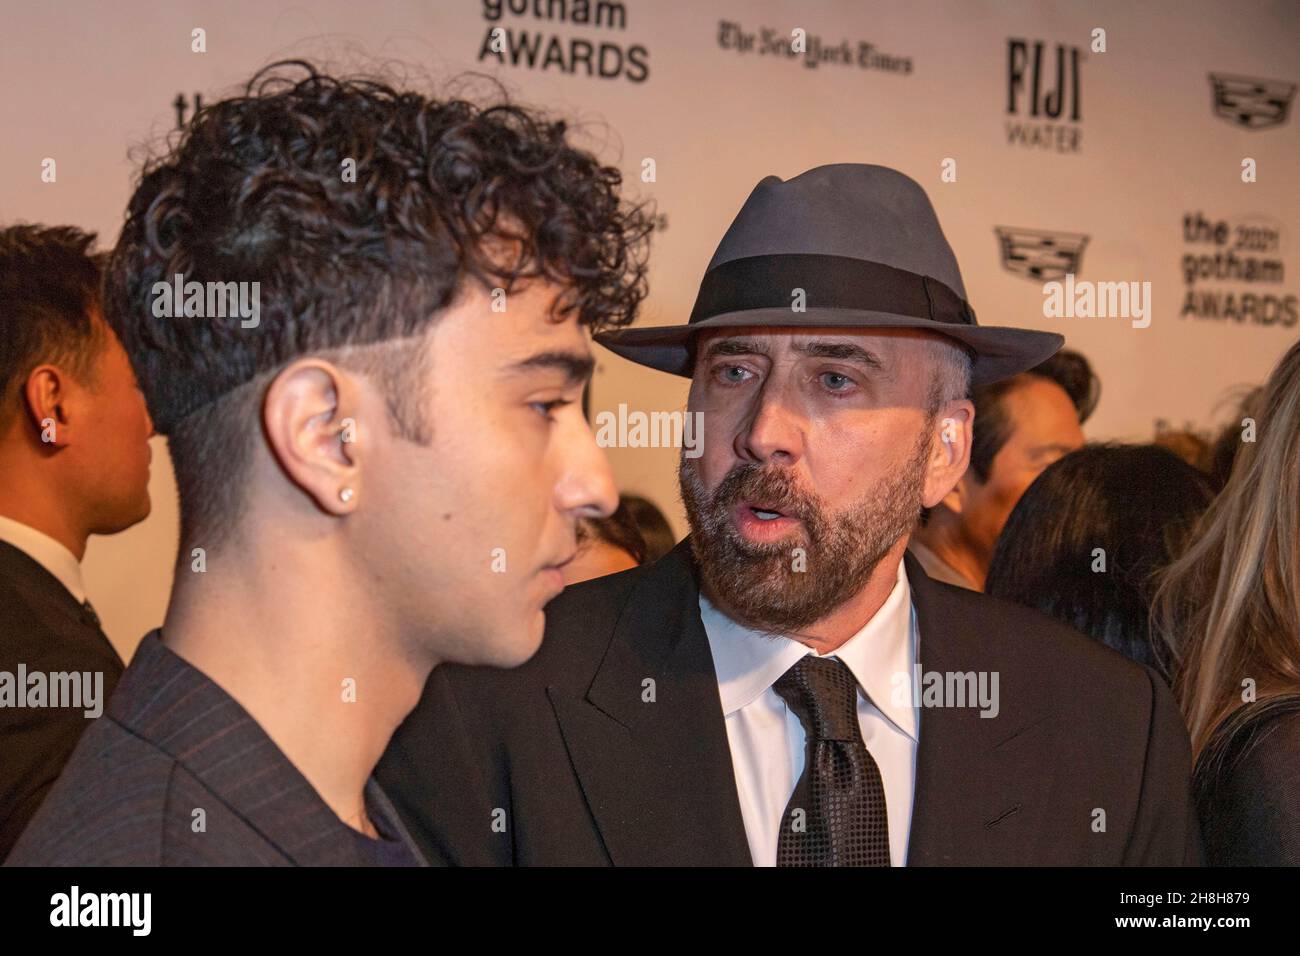 NEW YORK, NEW YORK - NOVEMBER 29: Nicolas Cage (R) attends the 2021 Gotham  Awards Presented By